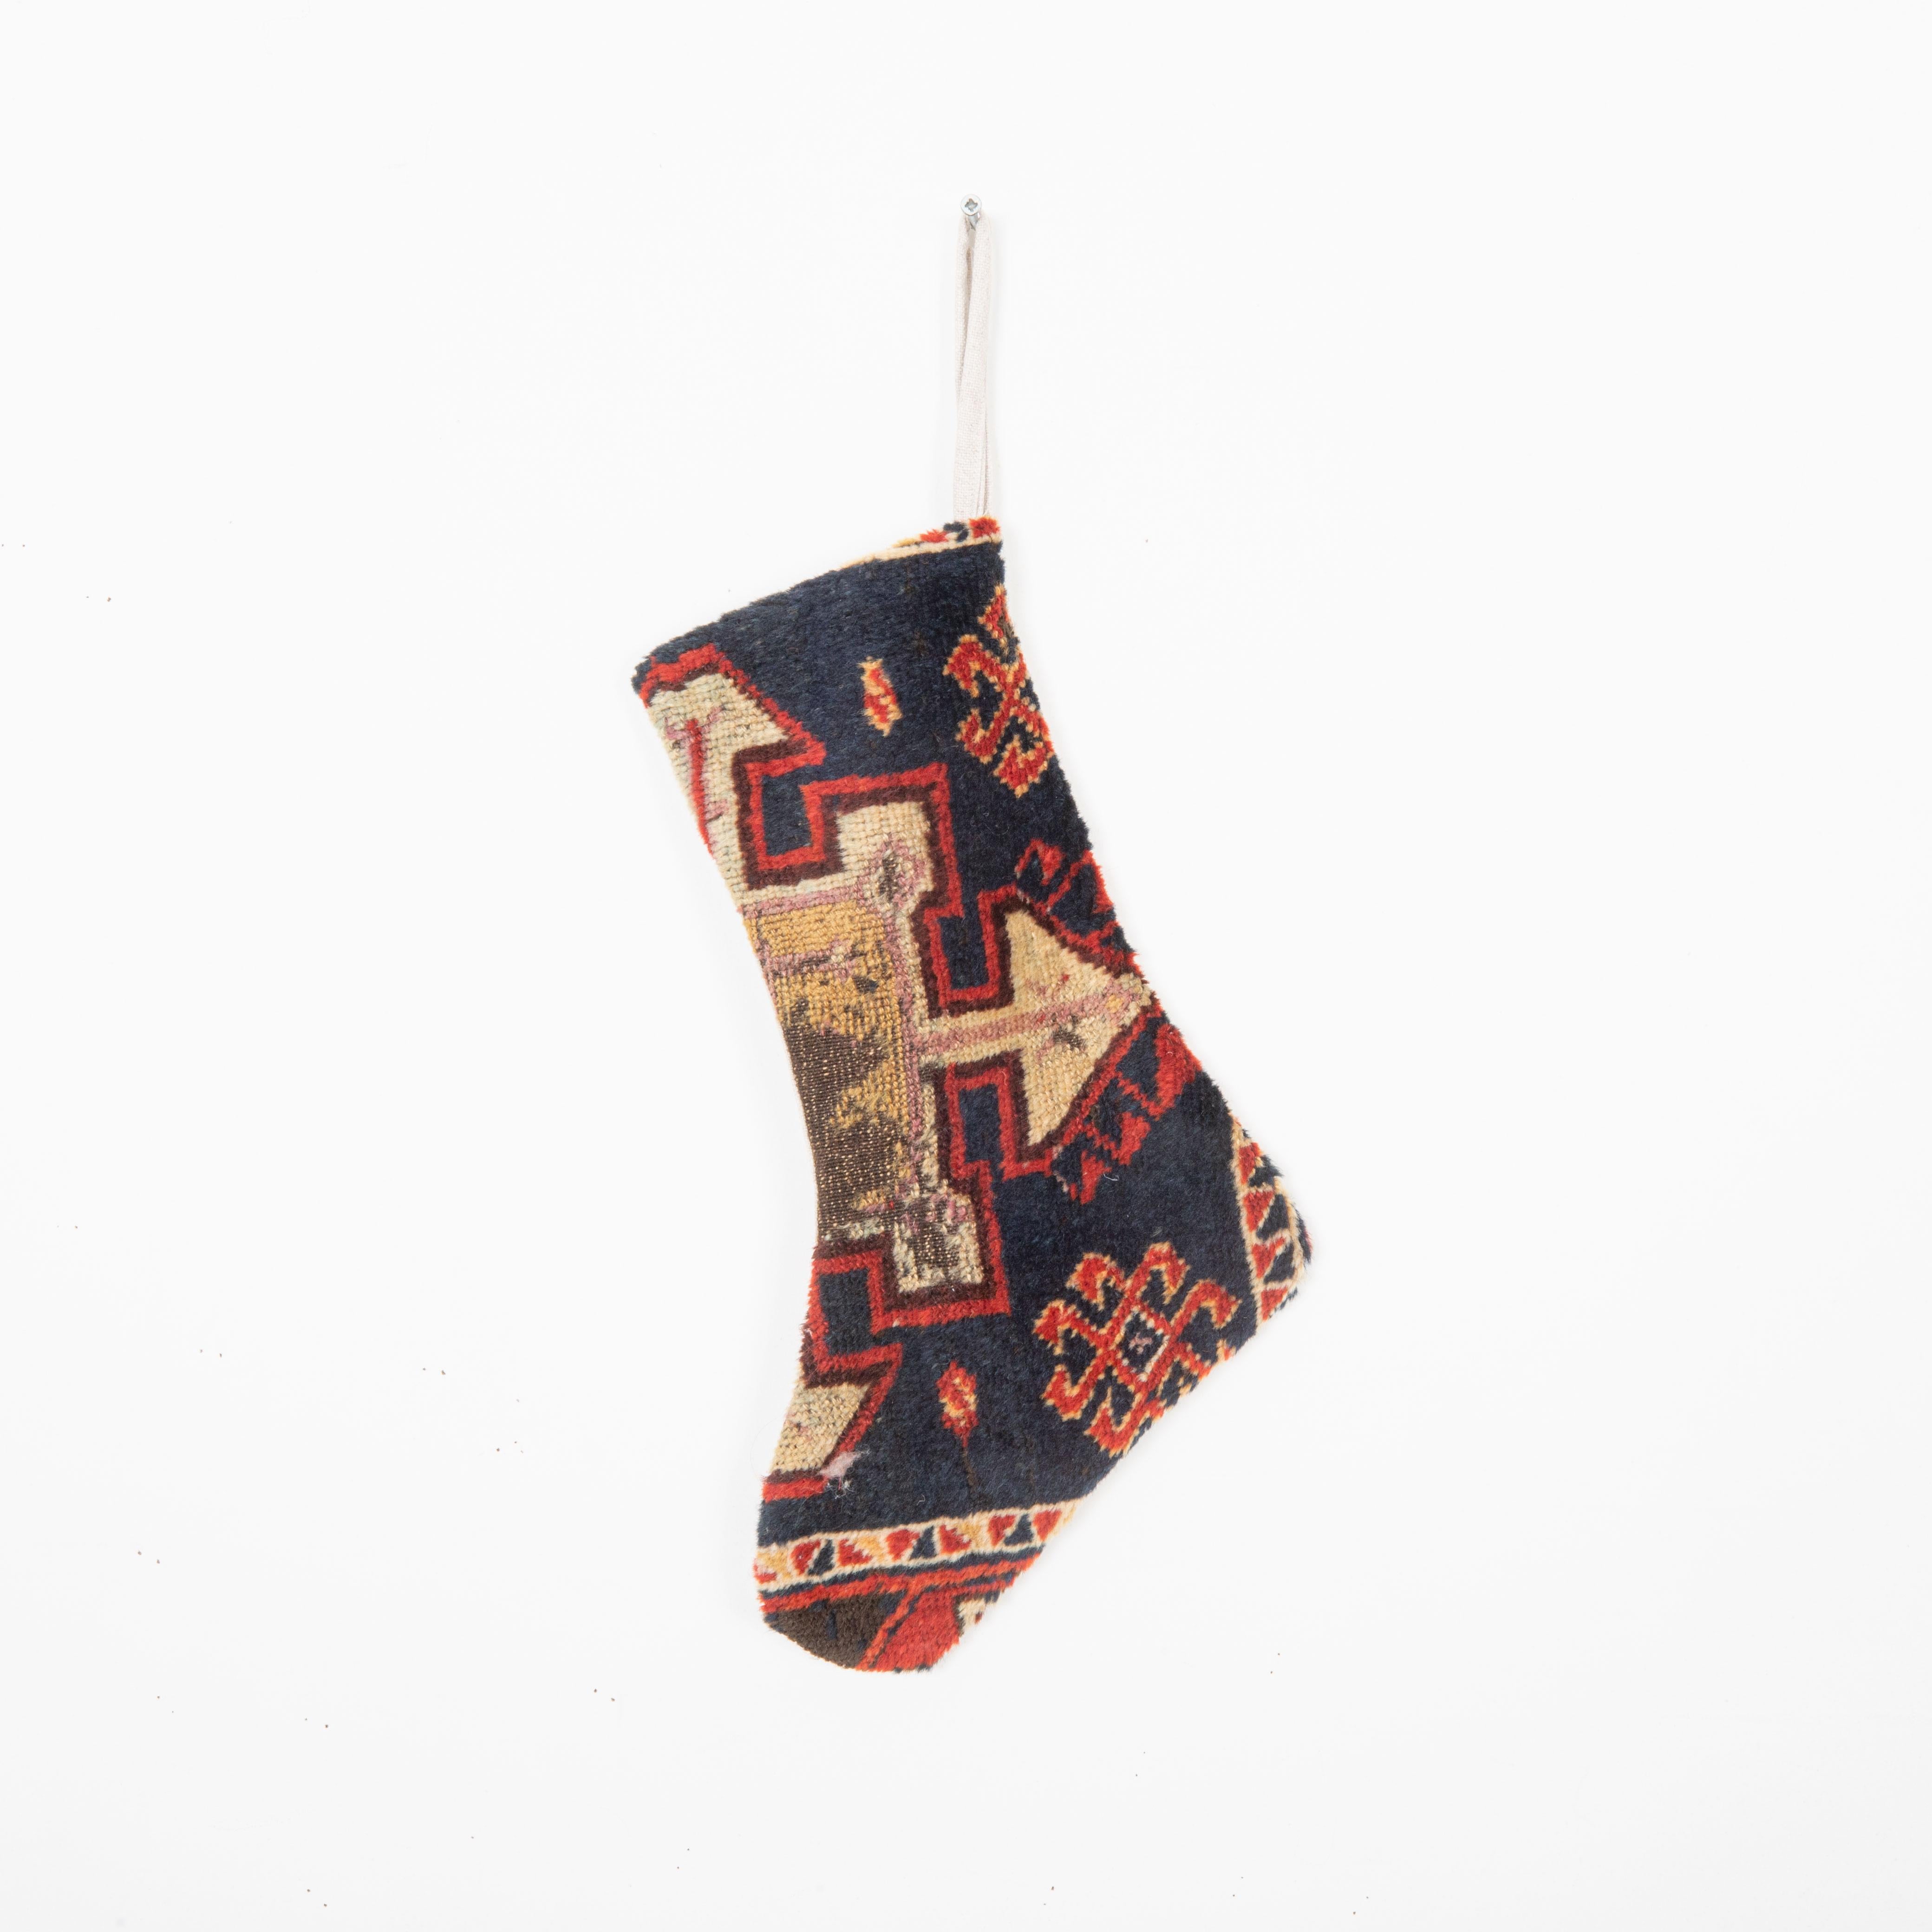 This Christmas Stocking was made from a late 19th or Early 20th C. Anatolian rug fragments.
Linen in the back.

Please note, this stocking was made from Anatolian rug fragments.
